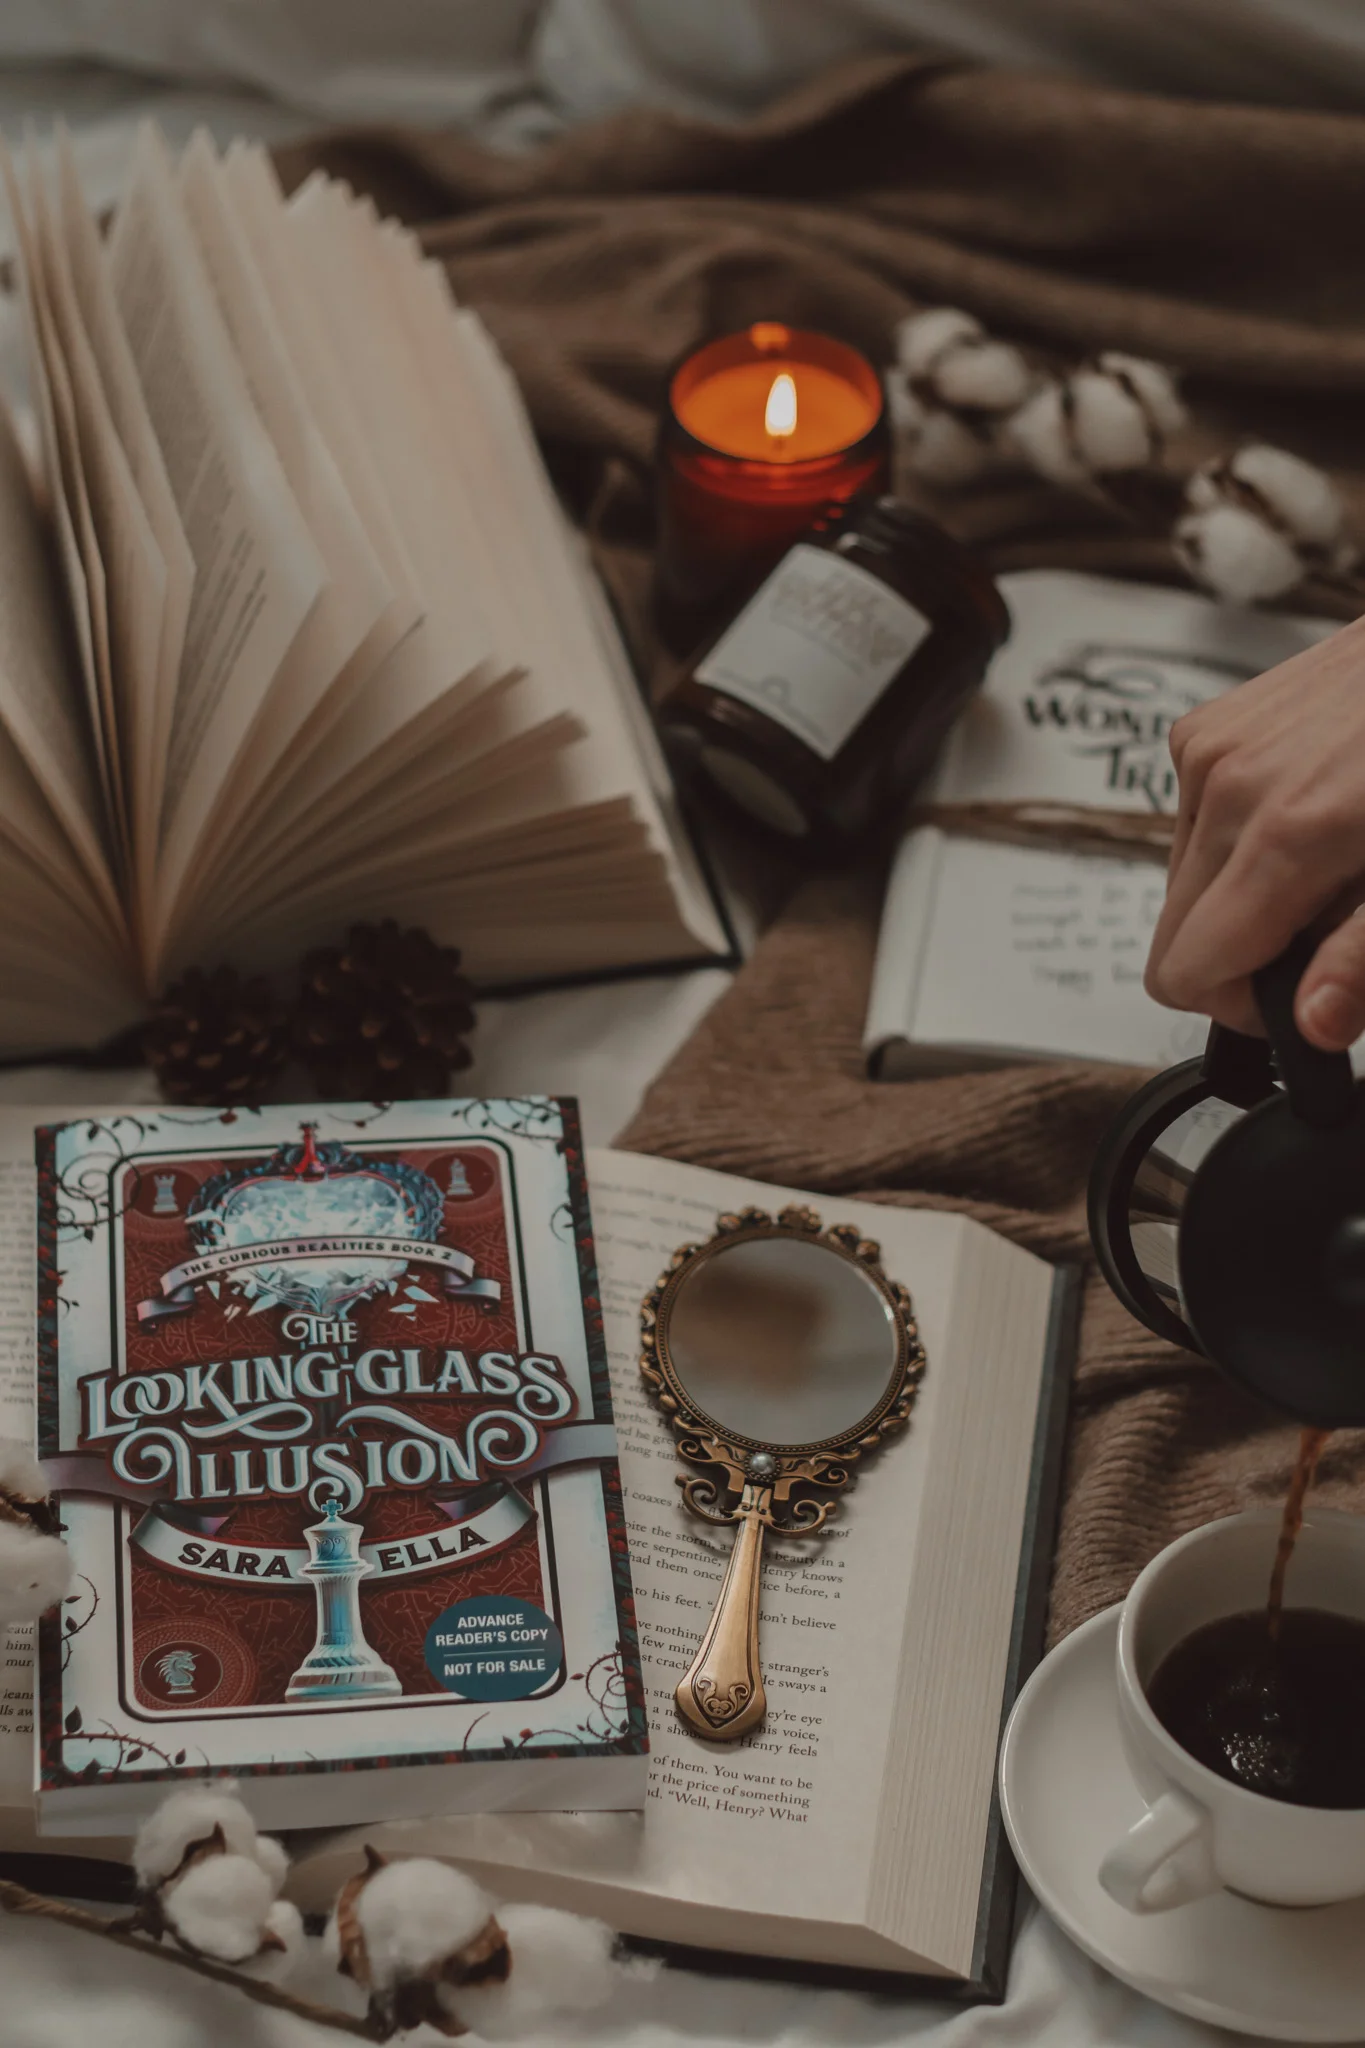 Why "The Looking-Glass Illusion” is Such a Satisfying Wonderland-Inspired Sequel by The Espresso Edition cozy book and lifestyle blog